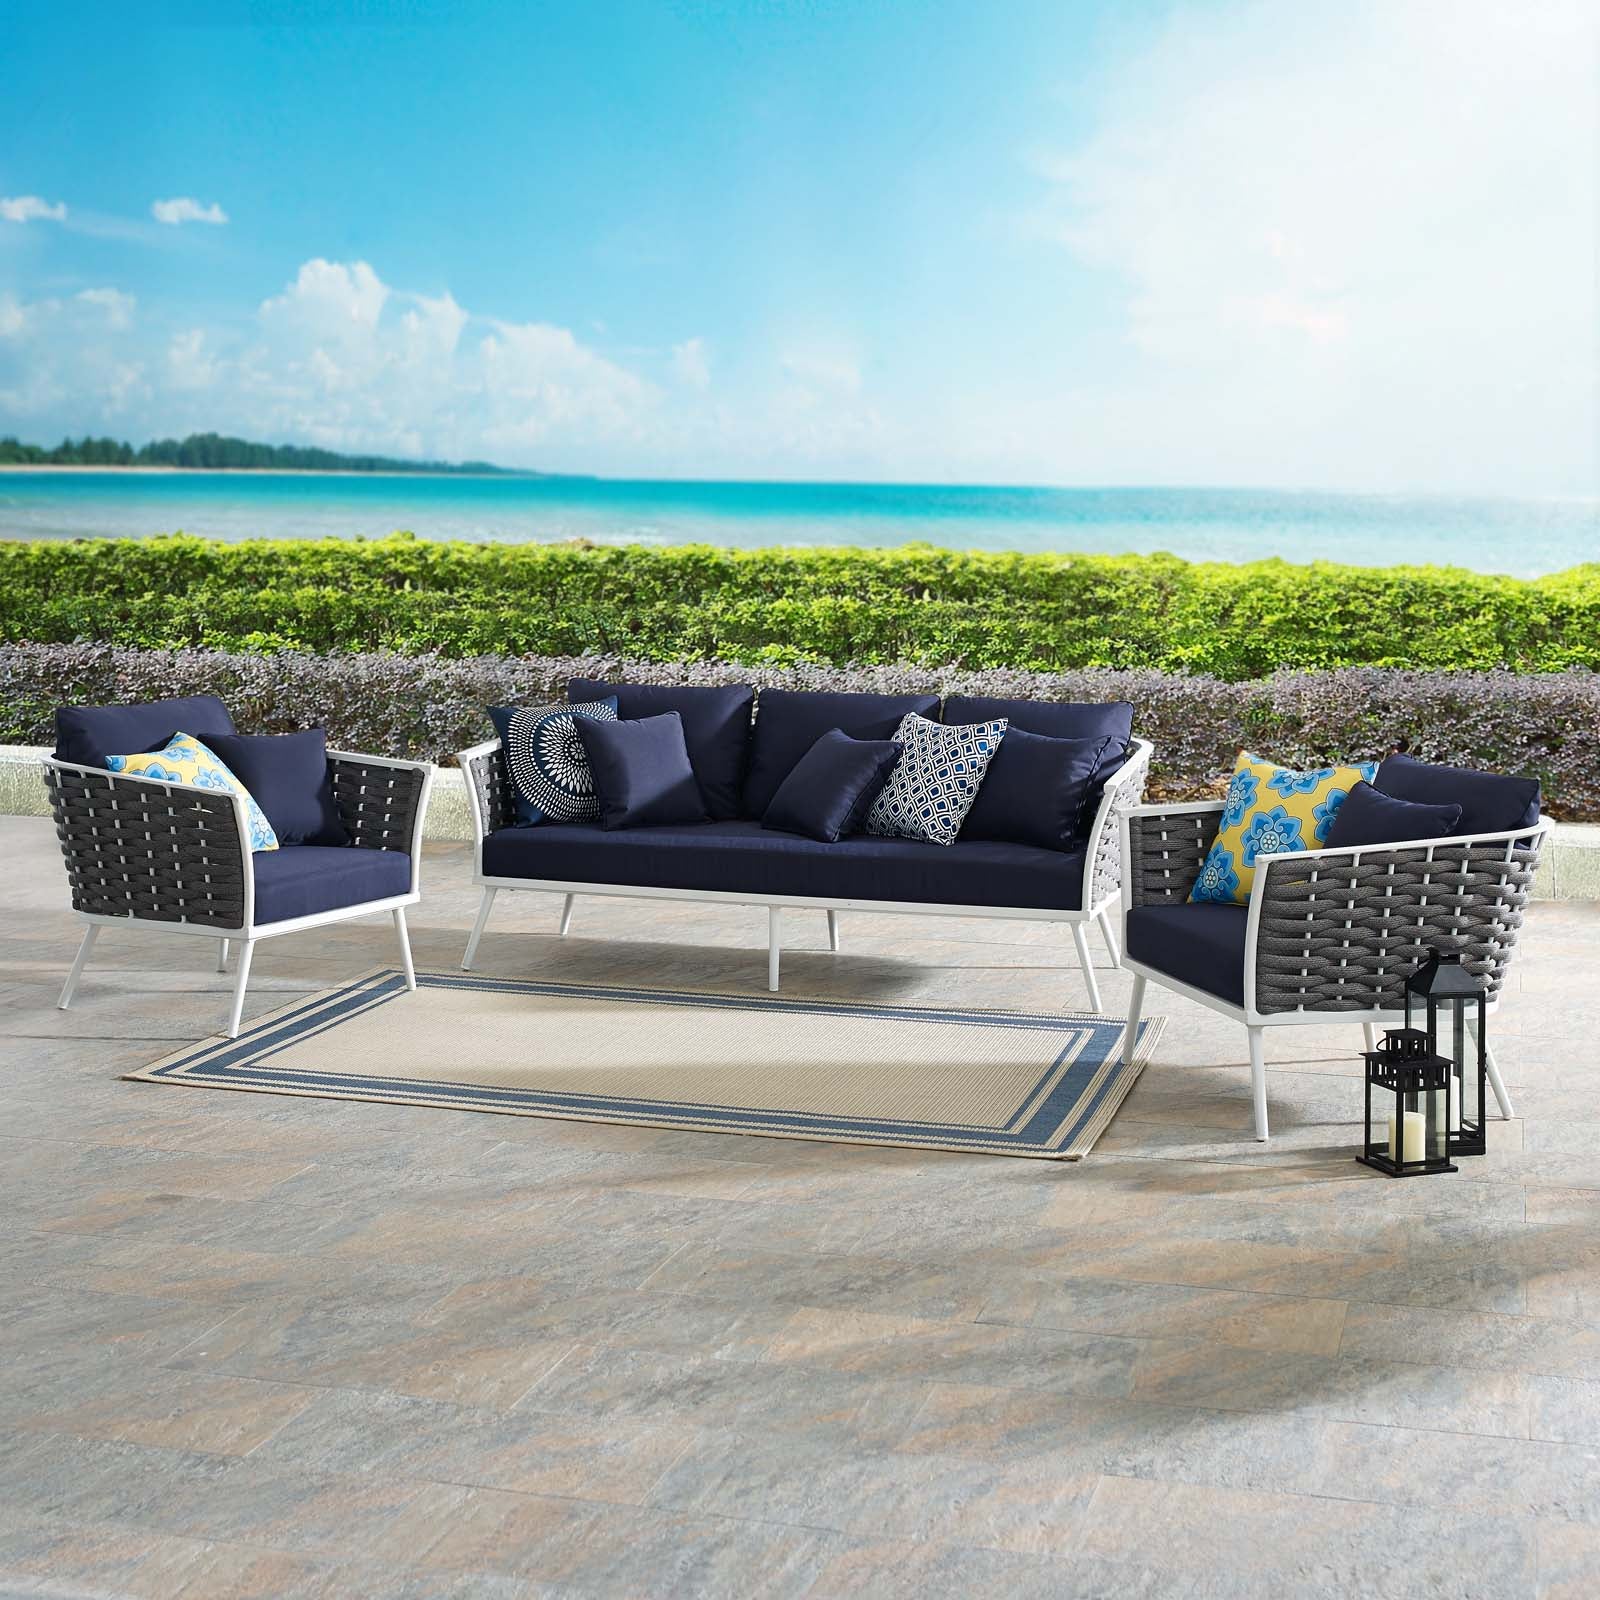 Stance 3 Piece Outdoor 31.5 " H Patio Aluminum Sectional Sofa Set White